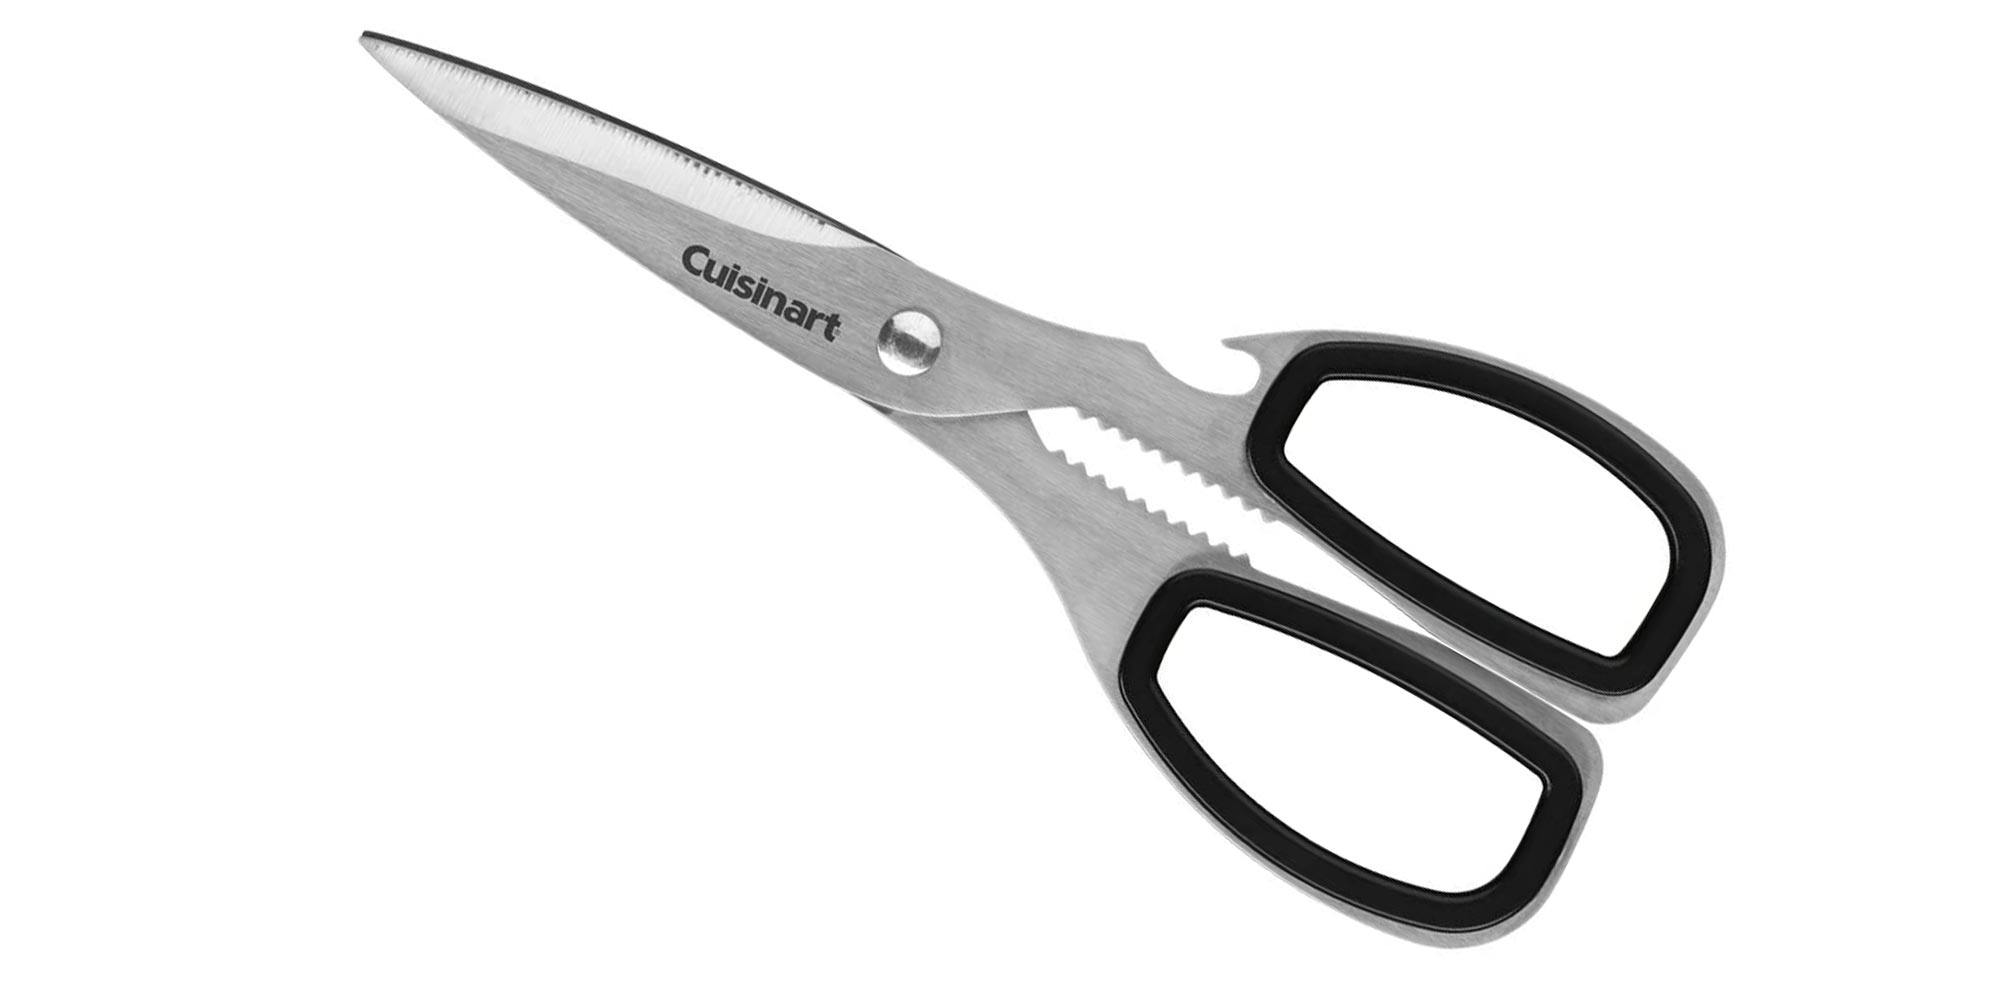 Cuisinart's classic shears come with a lifetime warranty at  low of $9